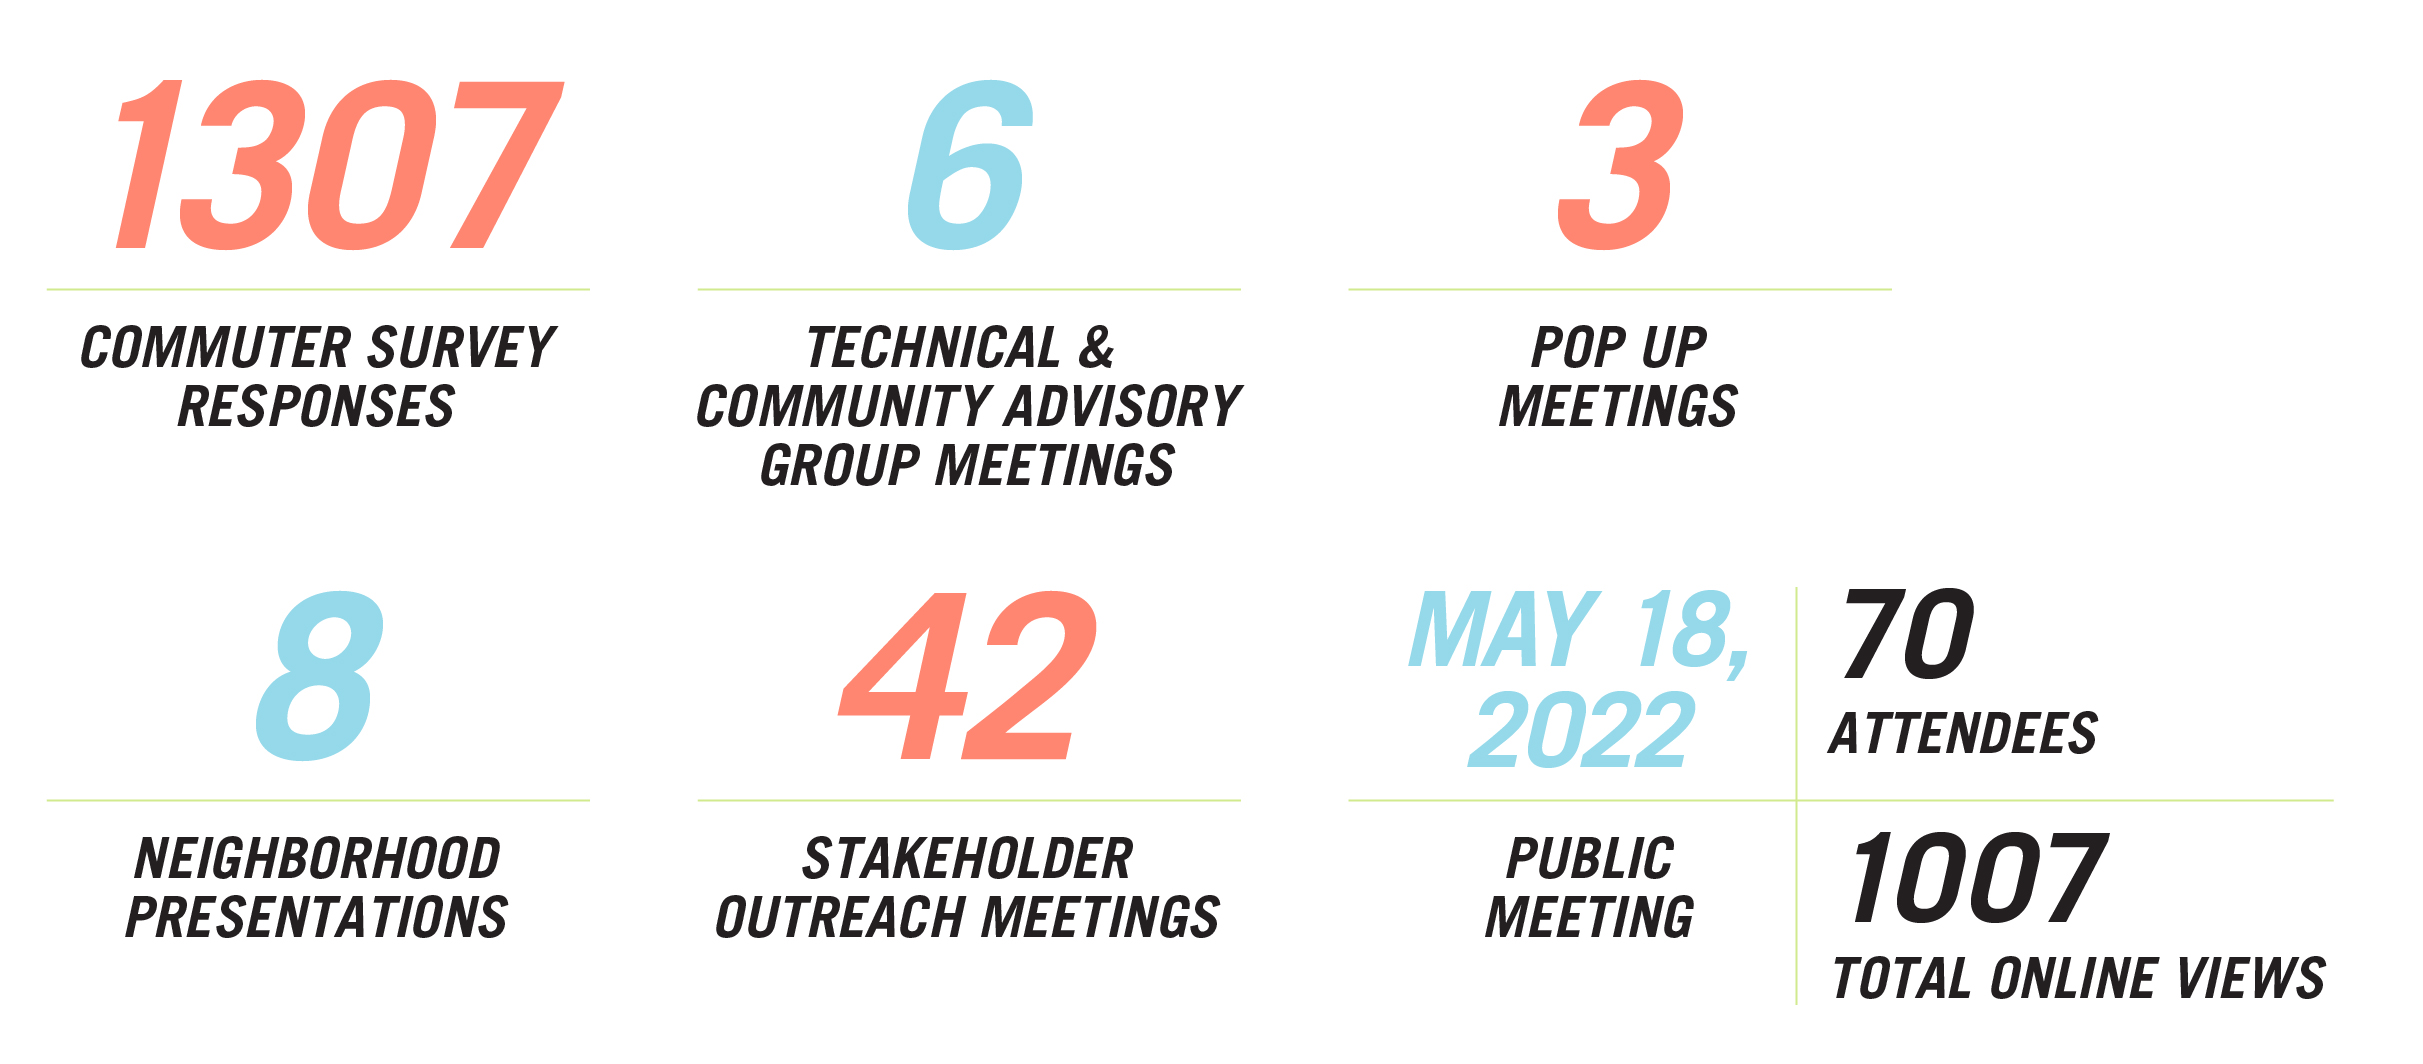 1307 Commuter Survey Responses; 6 Technical & Community Advisory Group Meetings; 3 Popup Meetings; 8 Neighborhood Presentations; 3 Stakeholder Outreach Meetings; 70 Attendees & 1007 Online Views of the May 18, 2022 Public Meeting.